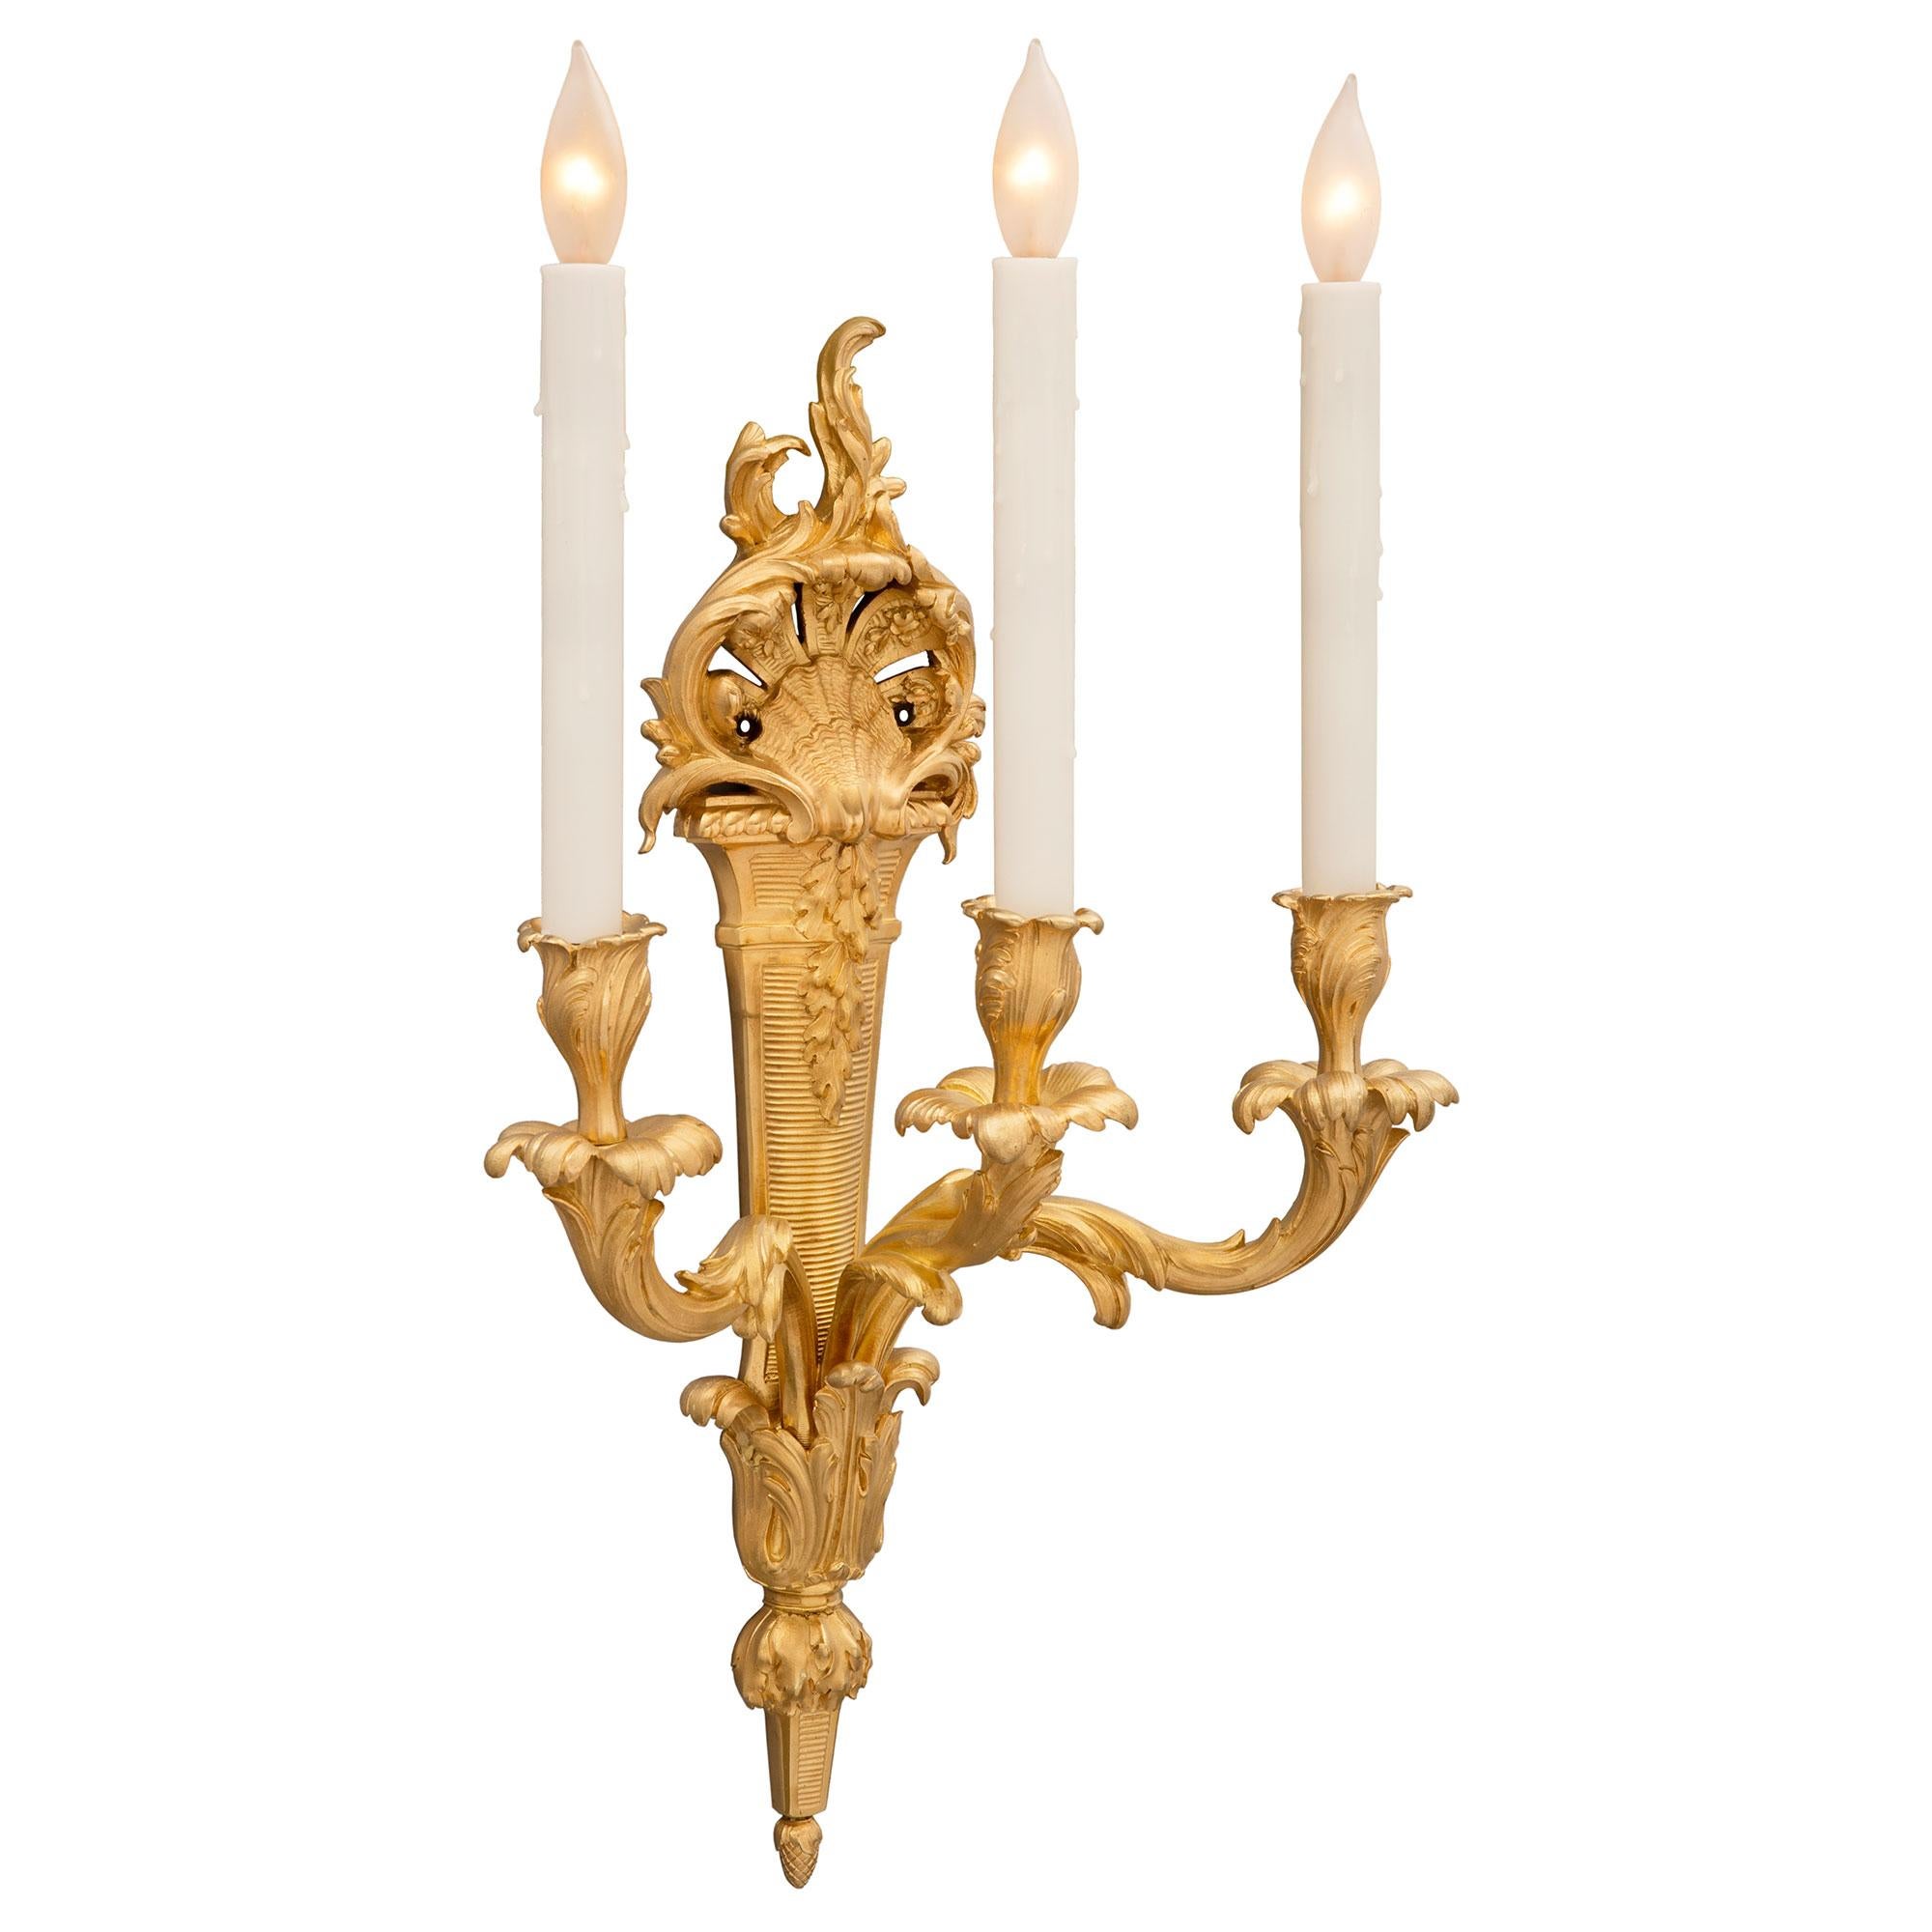 An elegant and most decorative pair of French 19th century Louis XV st. ormolu sconces. Each three-arm sconce is centered by a fine bottom acorn-shaped finial below striking richly chased large acanthus leaves. Each of the beautifully scrolled arms